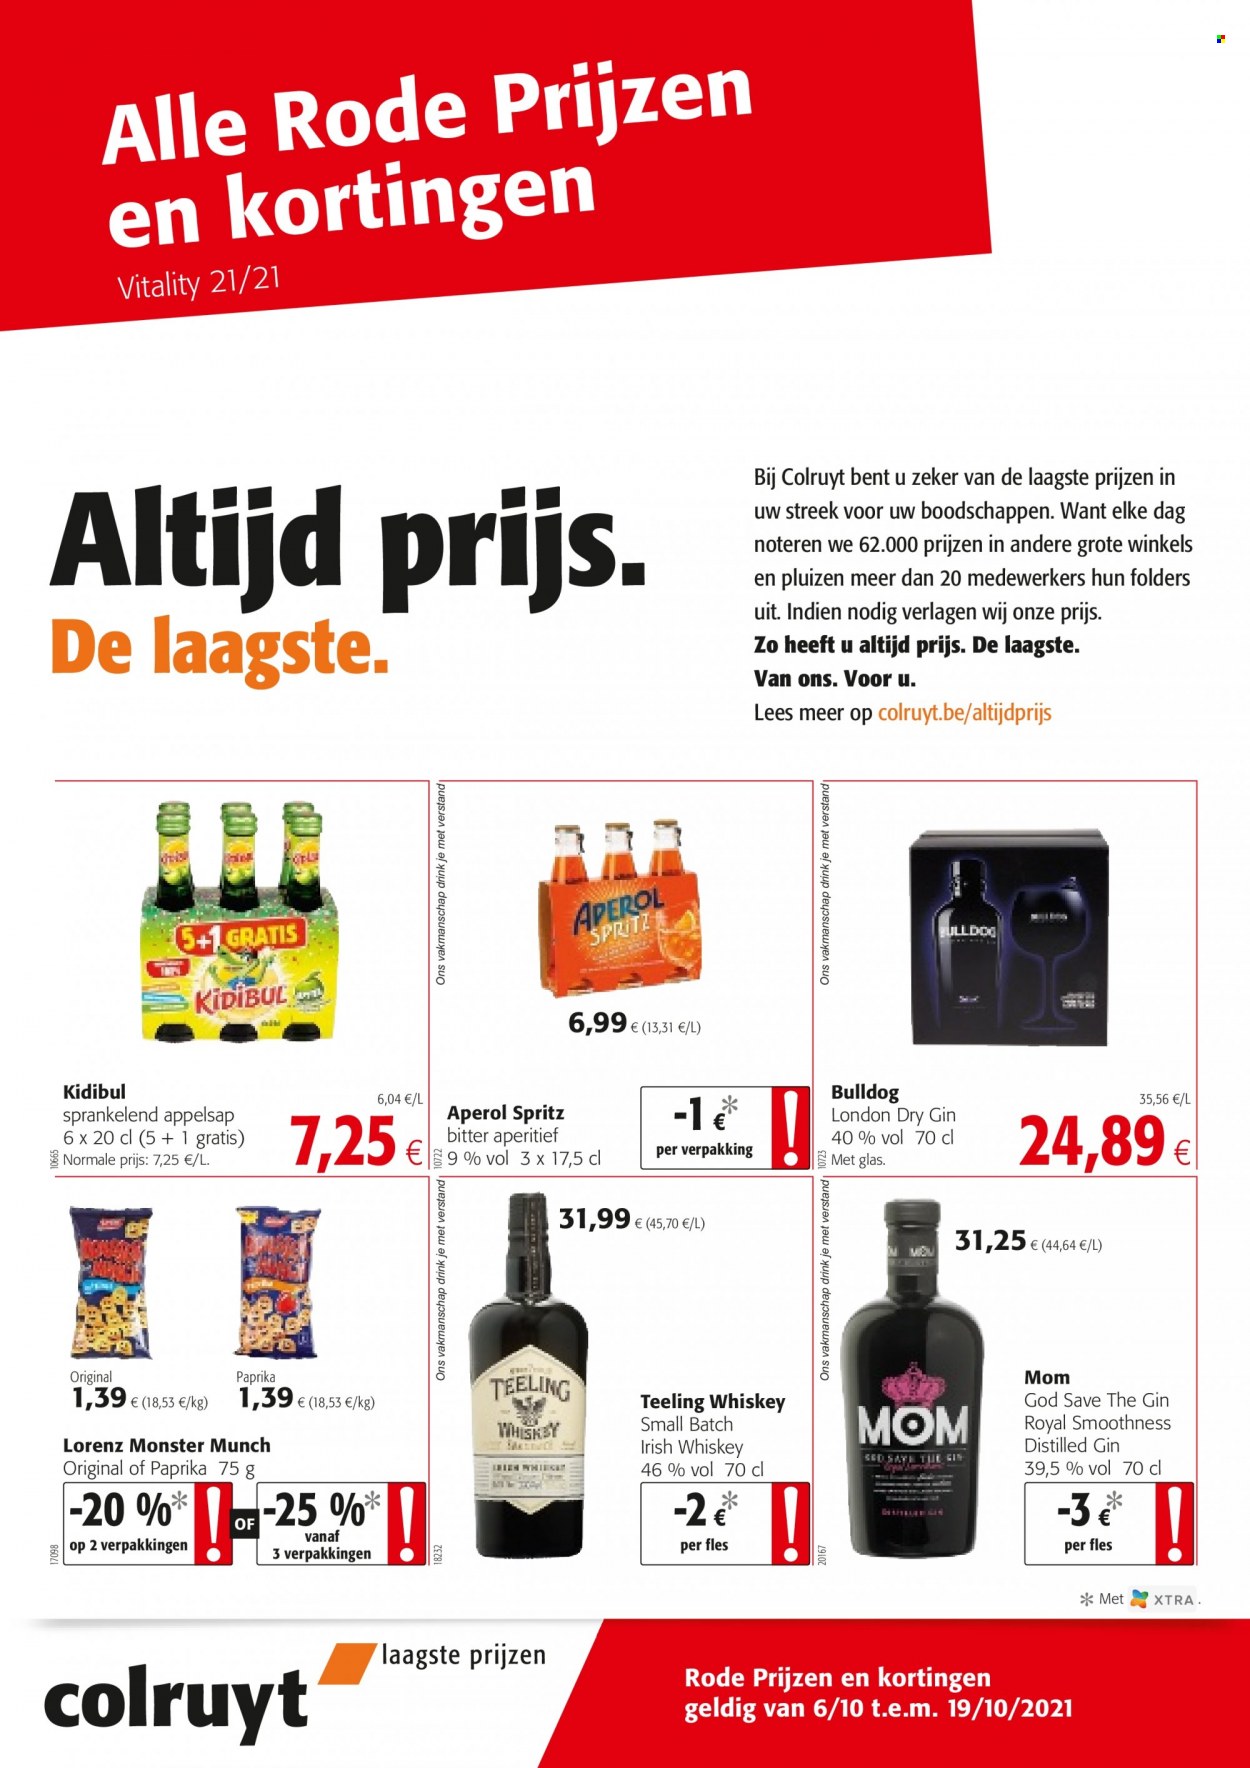 thumbnail - Catalogue Colruyt - 06/10/2021 - 19/10/2021 - Produits soldés - chips, Monster Munch, Monster, alcool, Bulldog, gin, Spritz, Aperol, whisky. Page 1.